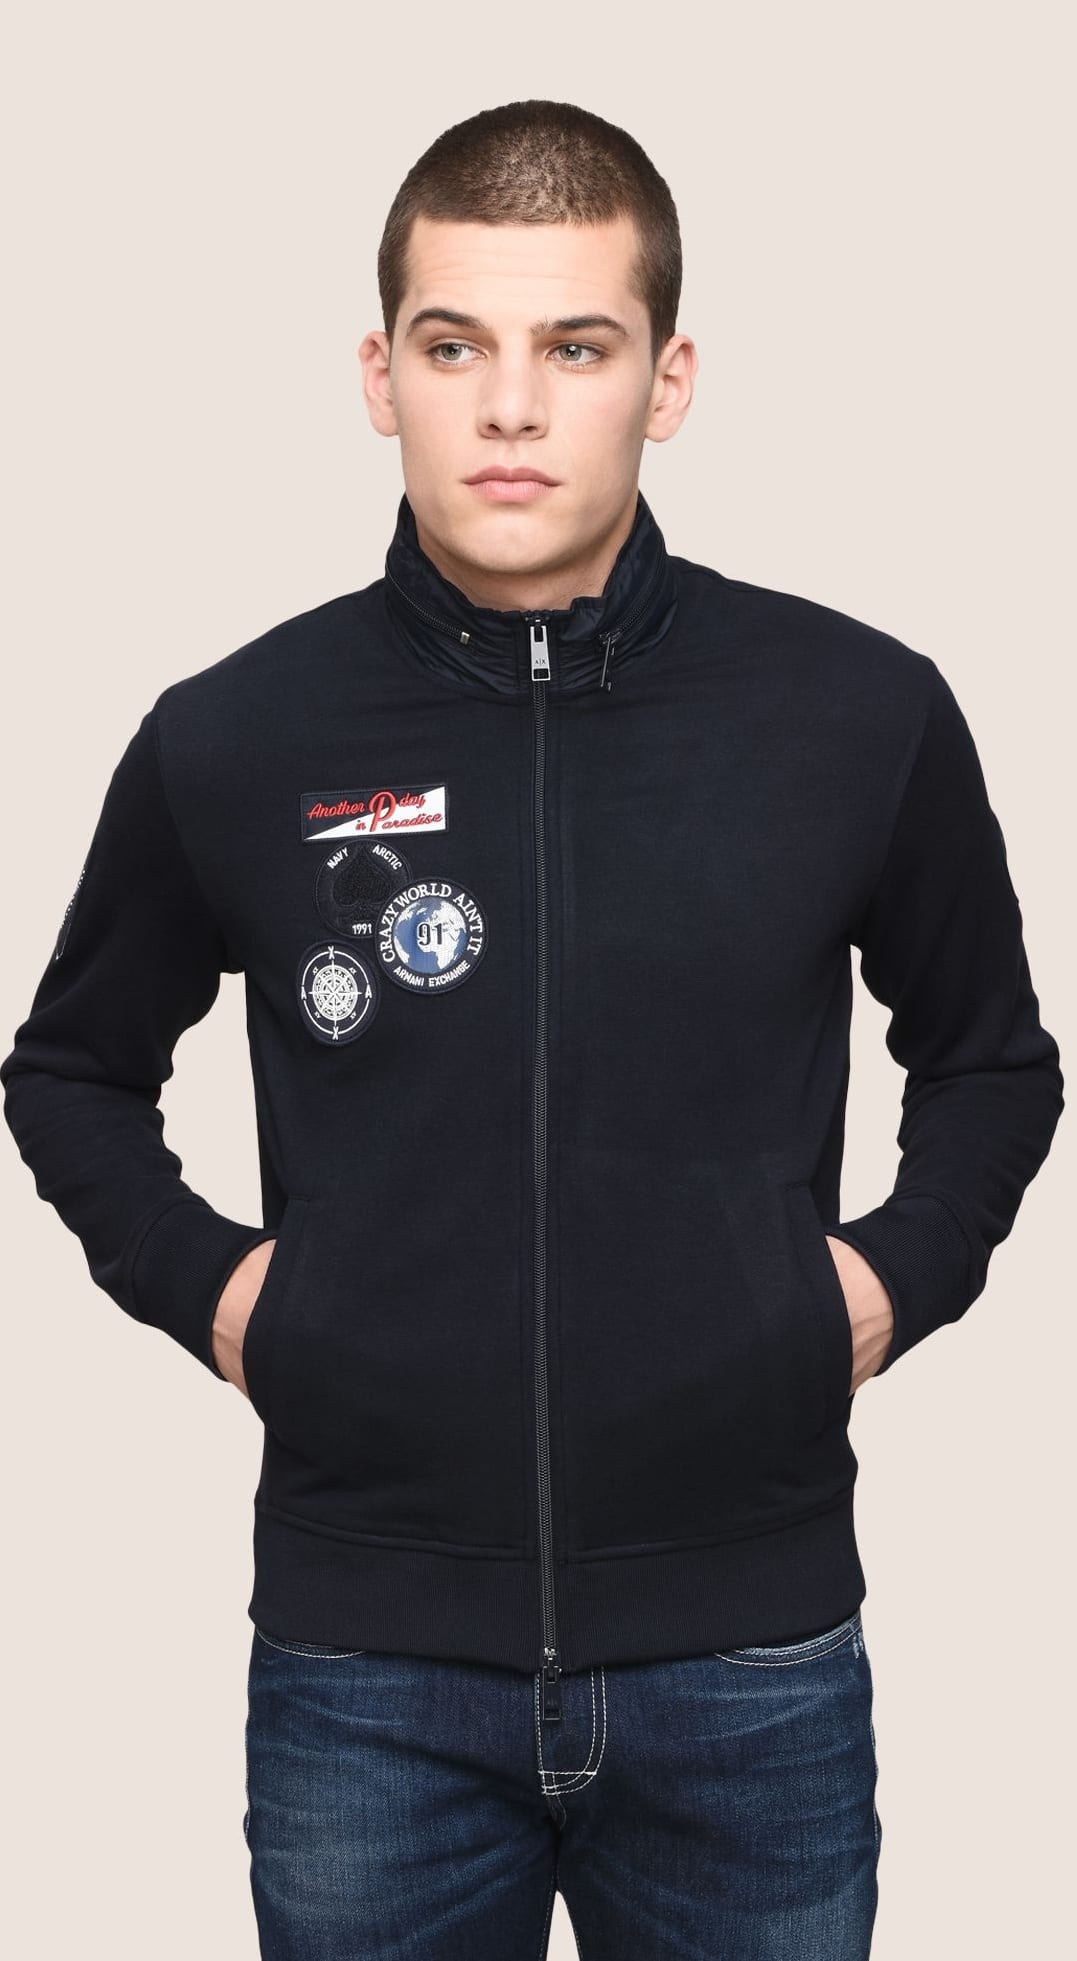 Track Jacket Patch Outfit For Men